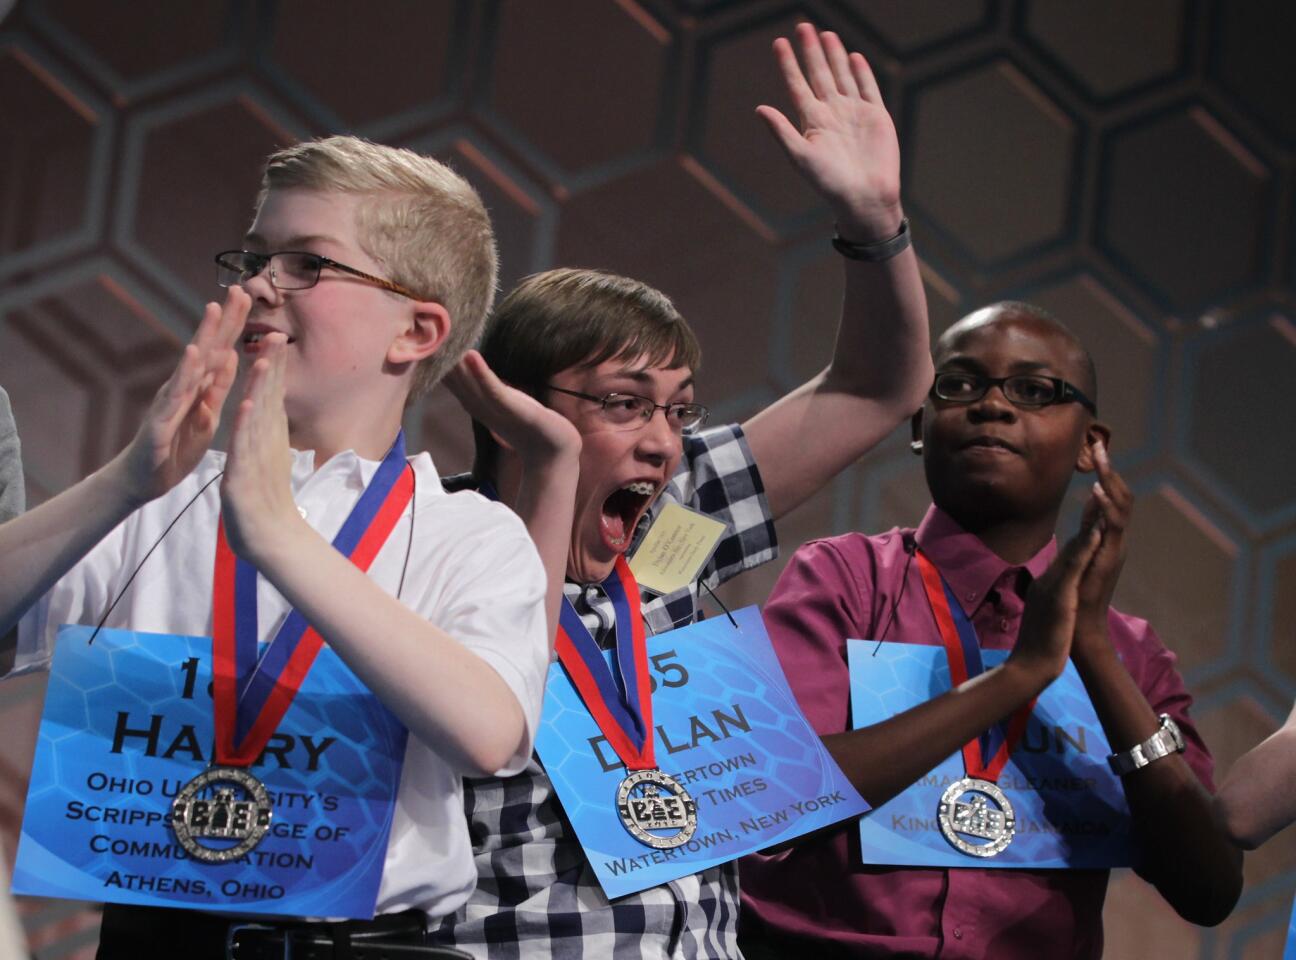 Students compete in National Spelling Bee